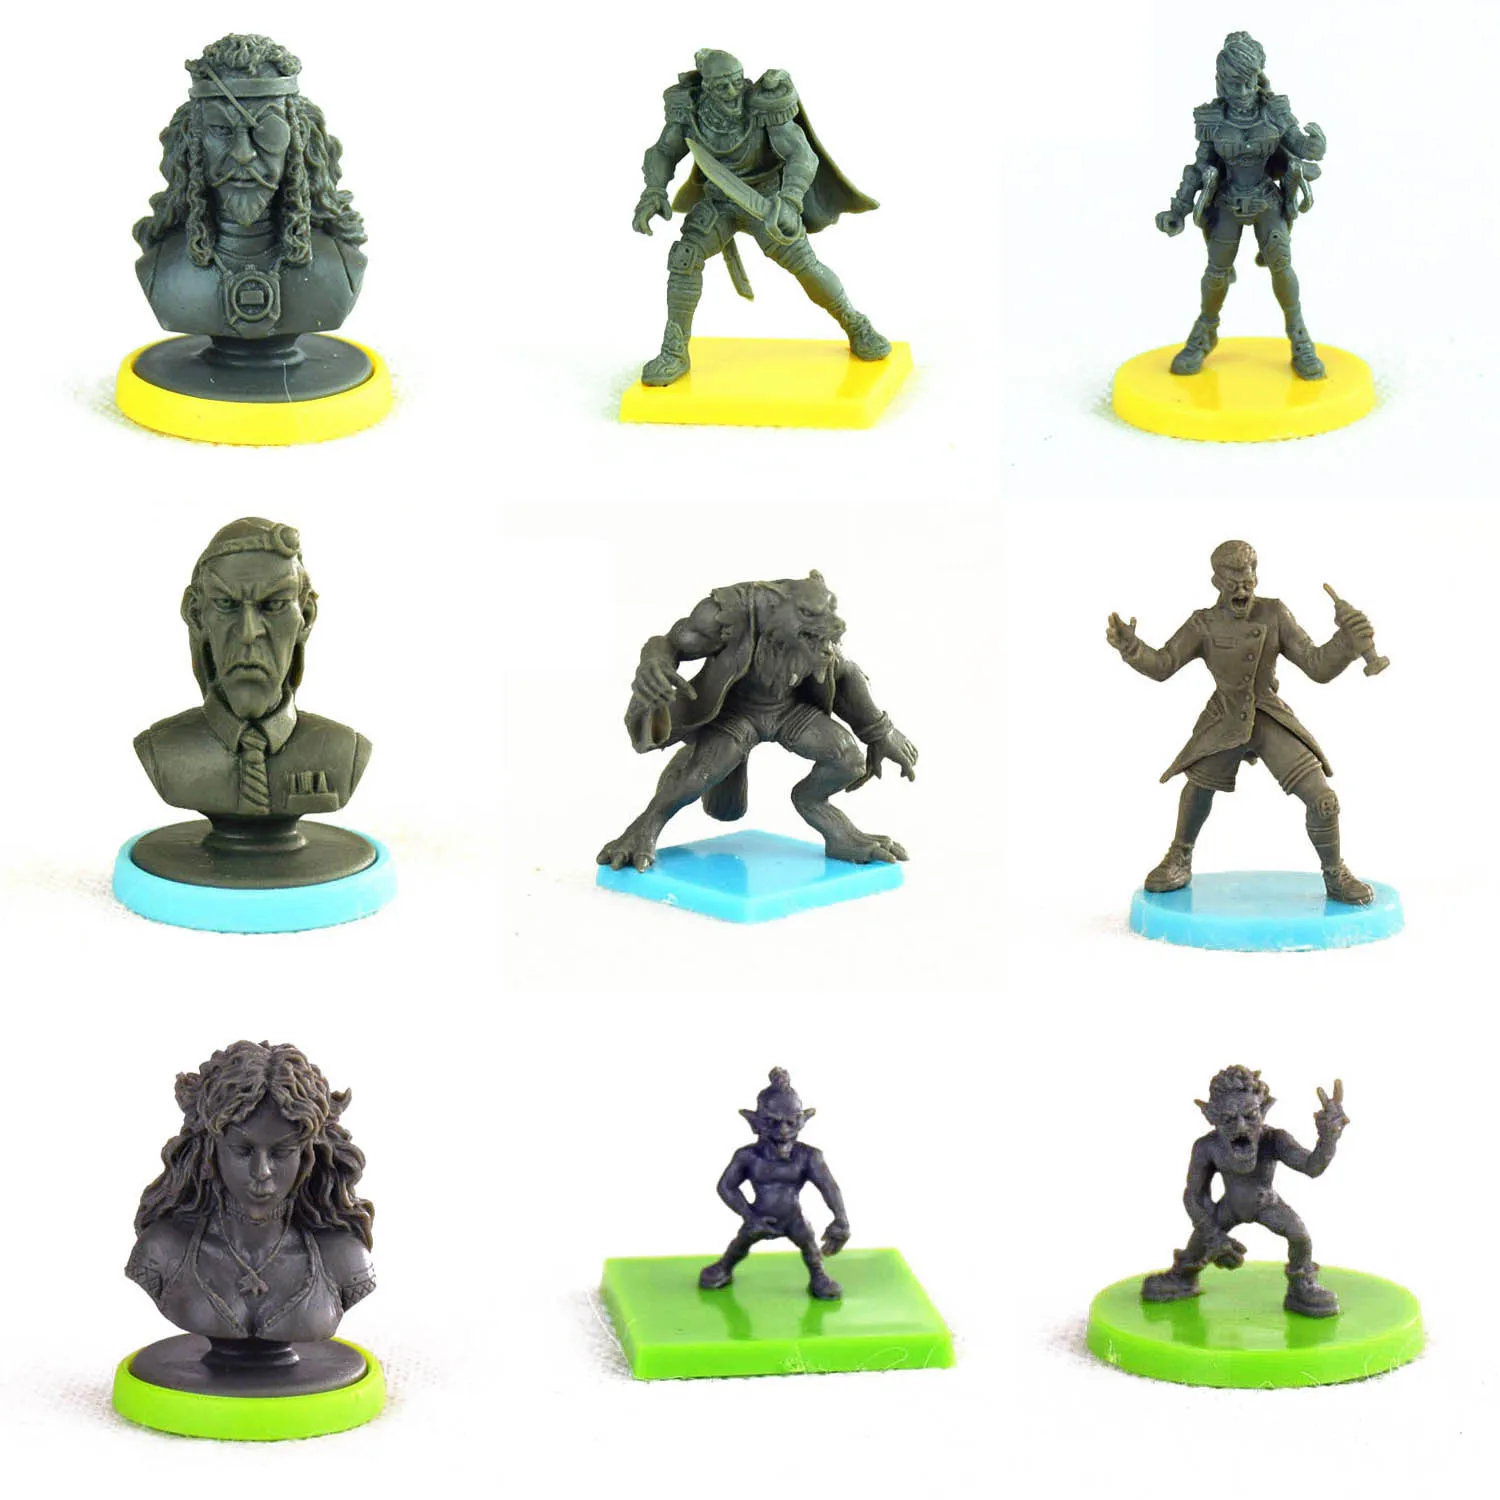 

Die casting resin Coolminiornot Board Role-playing Games Kaosball Chaos Football Cmon Model Imperial Family Pirate Goblin